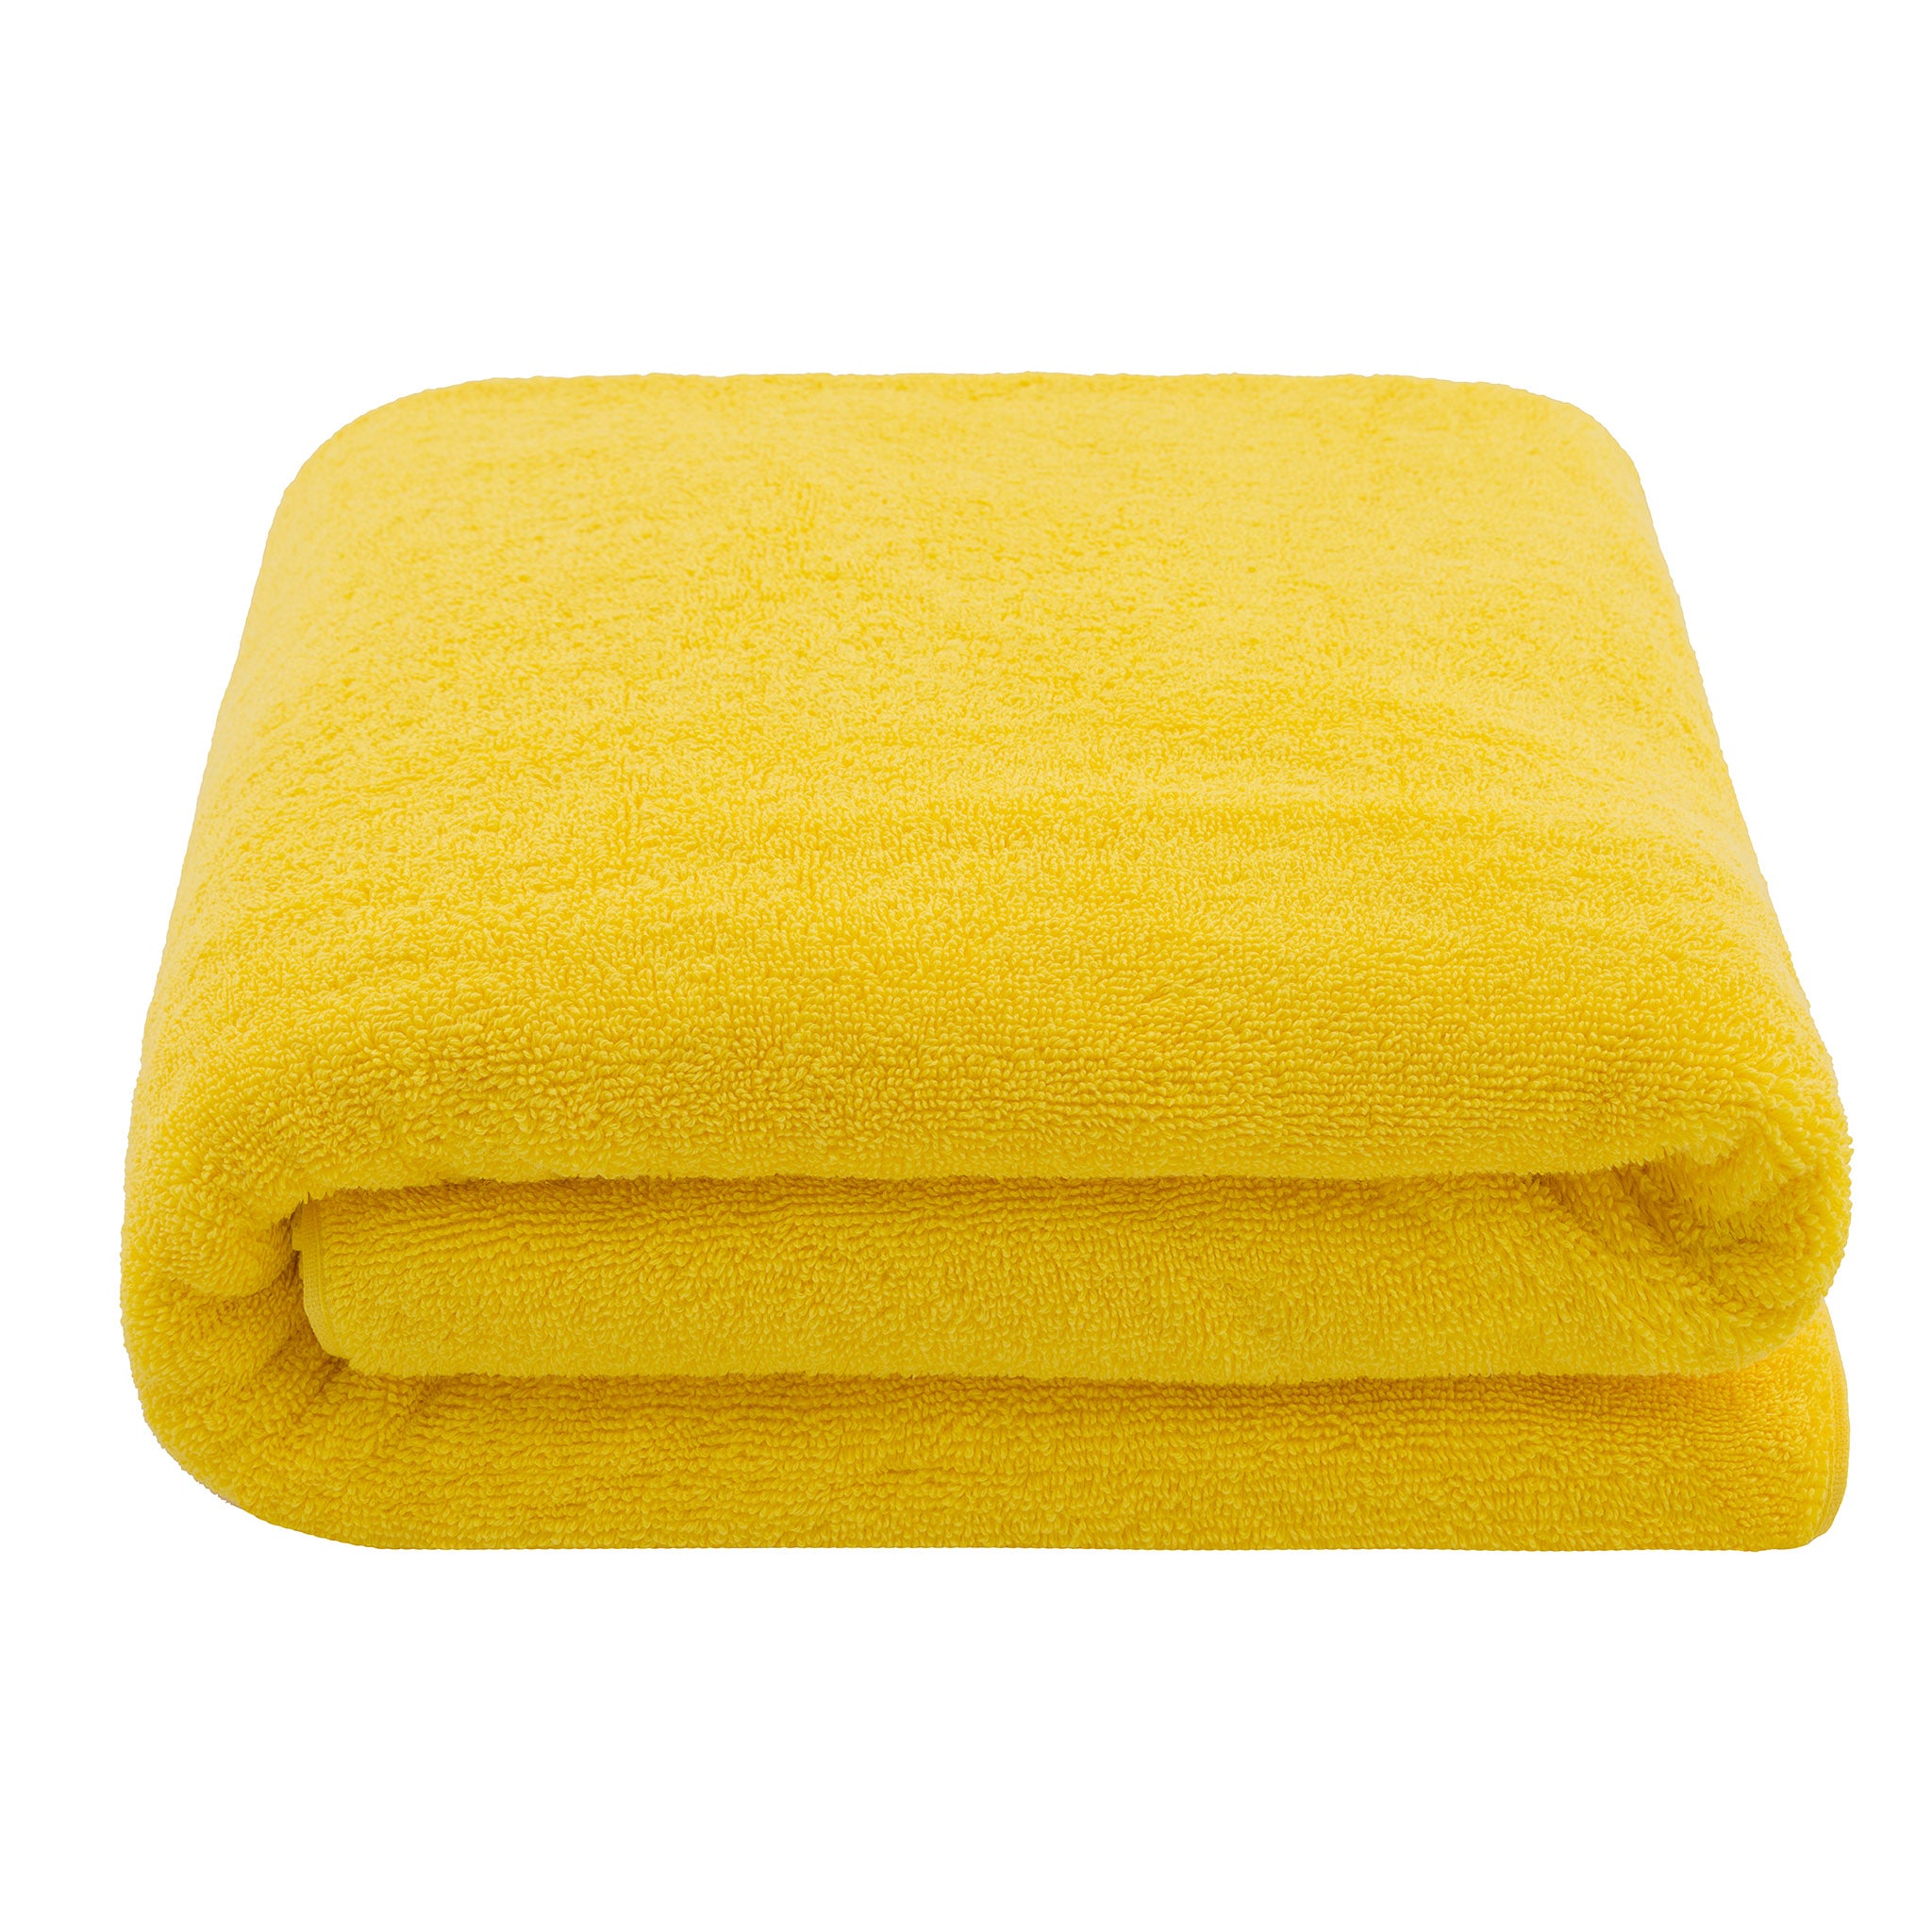 American Soft Linen 100% Ring Spun Cotton 40x80 Inches Oversized Bath Sheets yellow-3